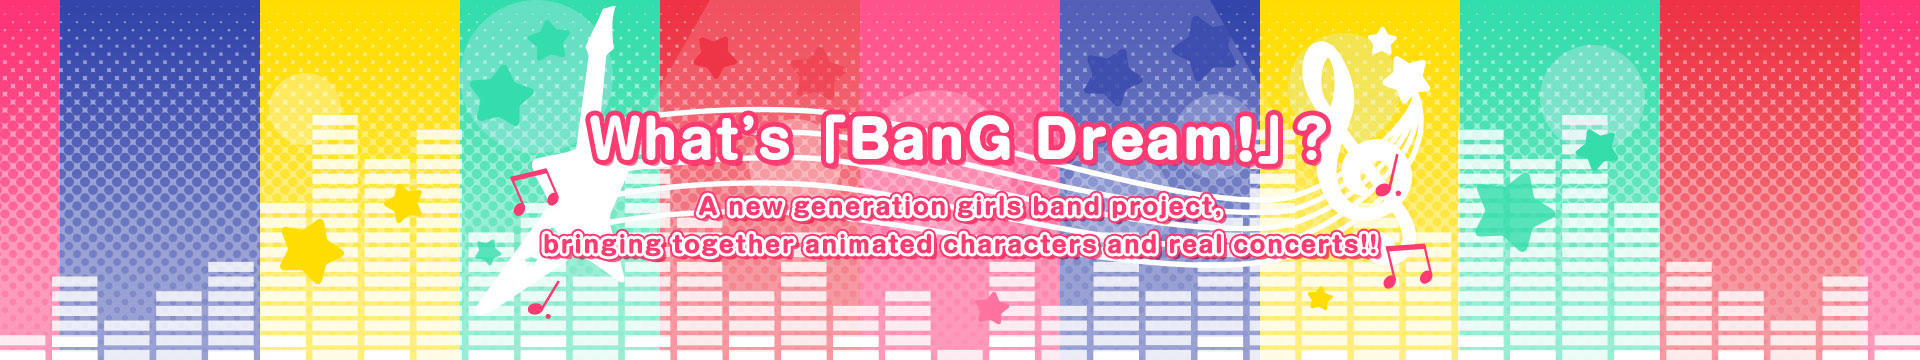 What’s 「BanG Dream！」? A new generation girls band project, bringing together animated characters and real concerts!!